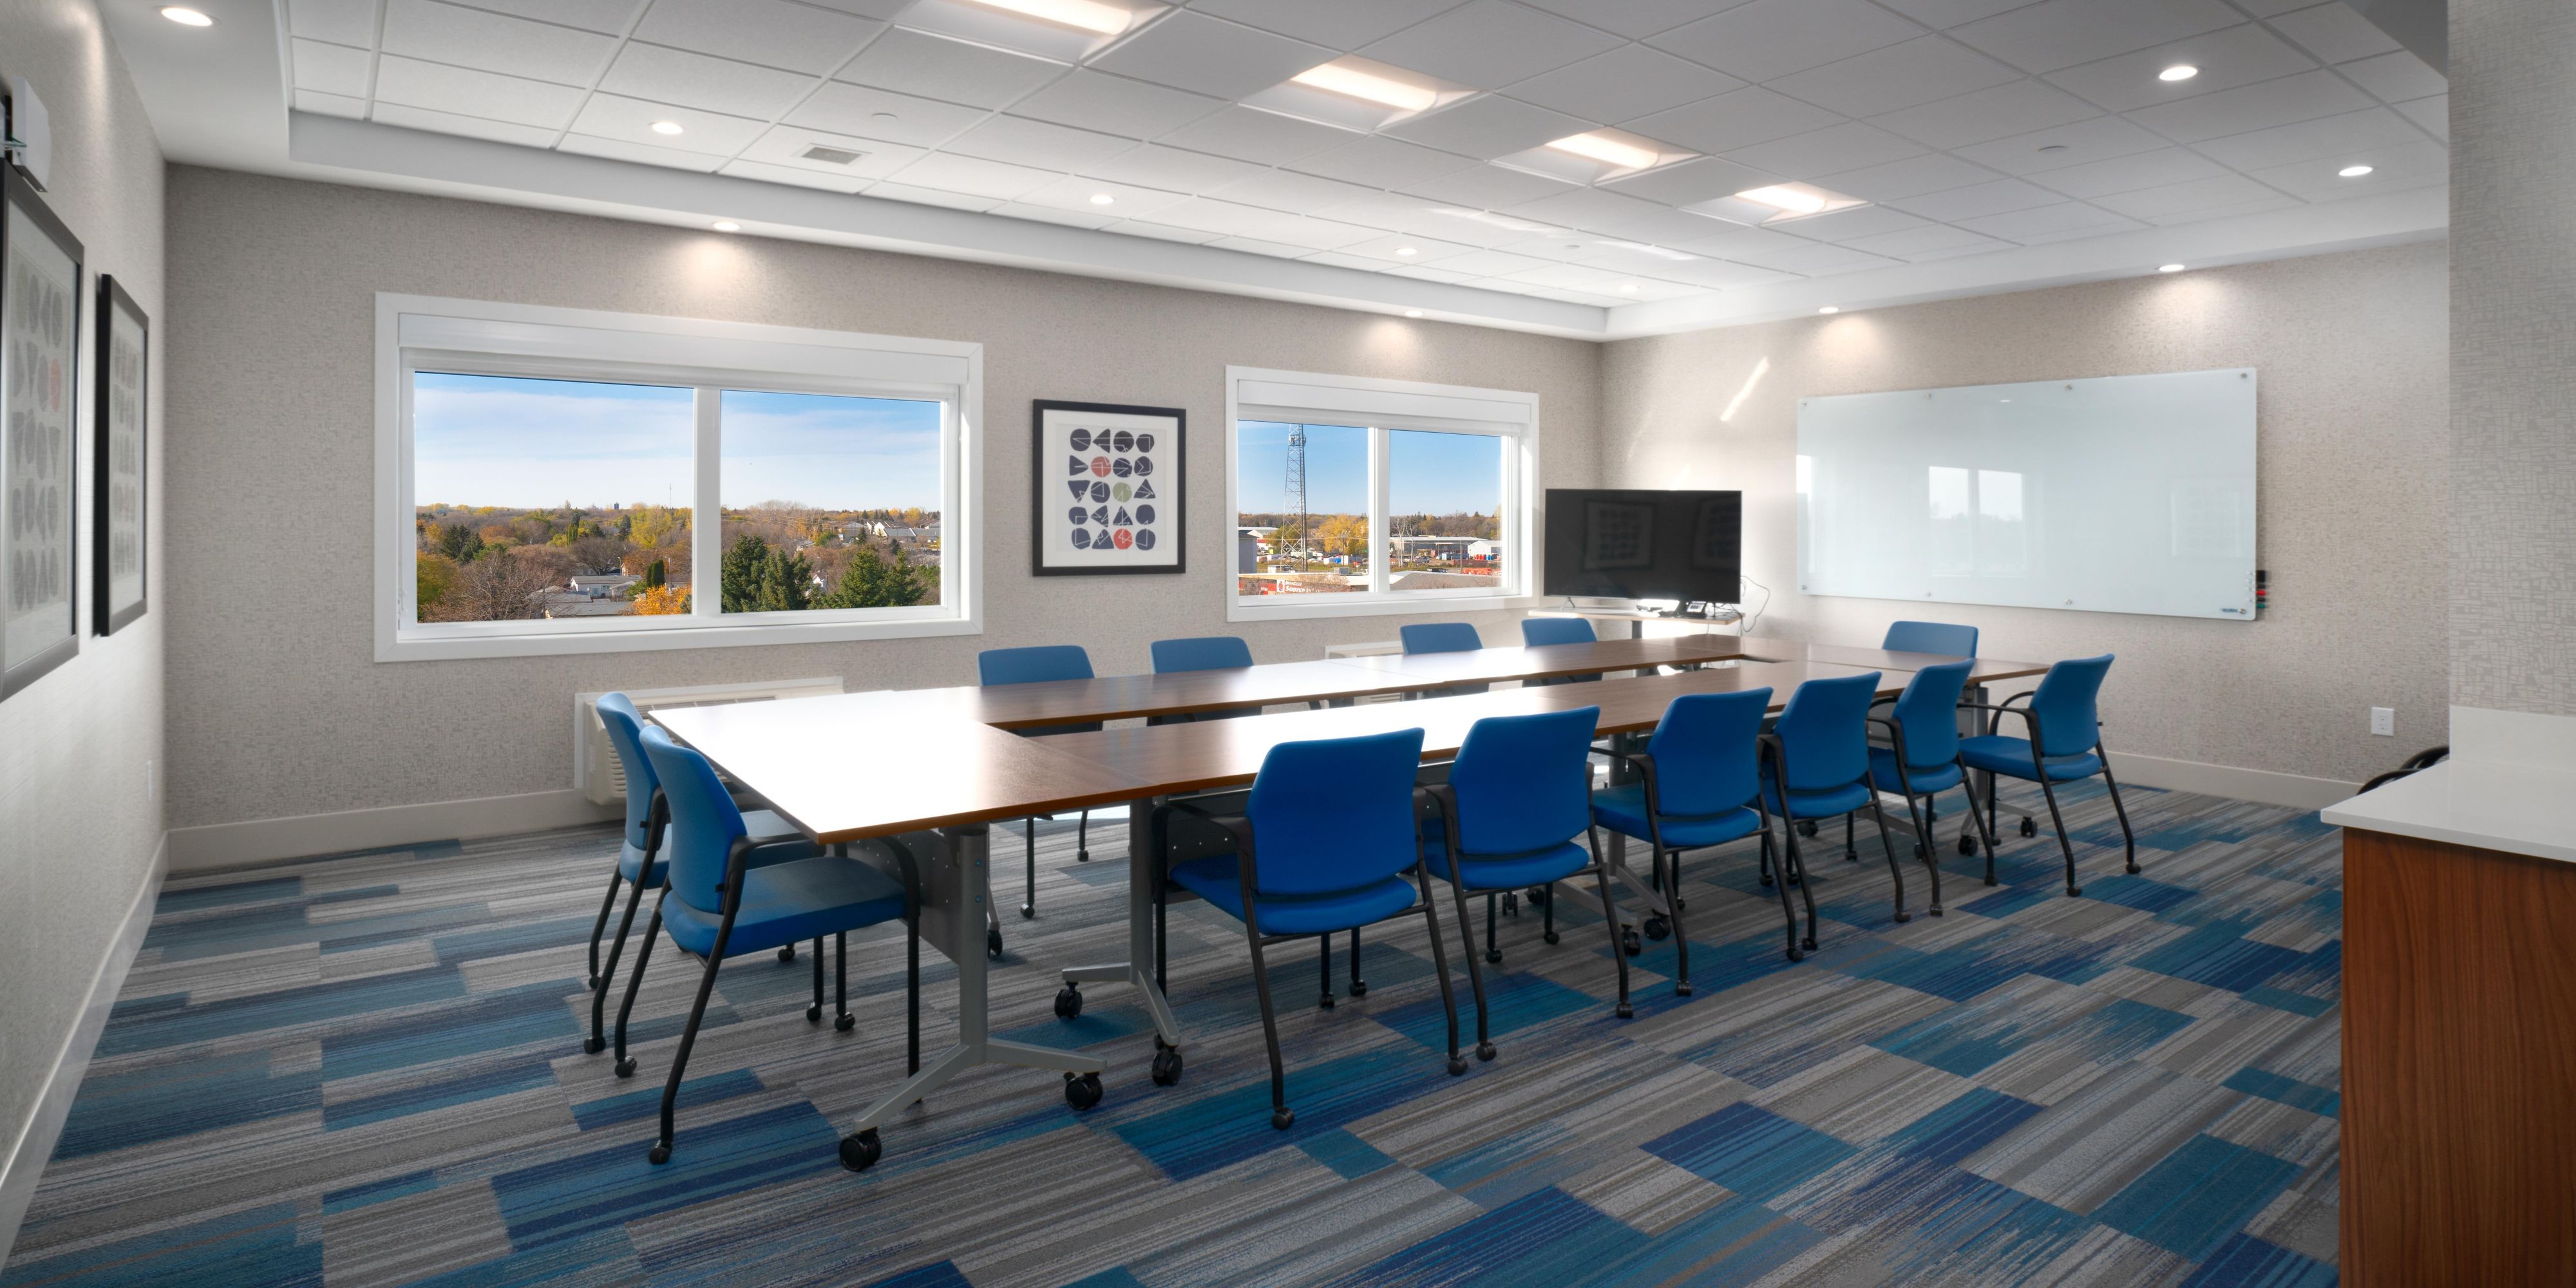 Meet with Confidence at The Holiday Inn Express & Suites Brandon, as we offer ample options to host your meetings, while keeping the Health and Safety of your delegates top of mind.  
